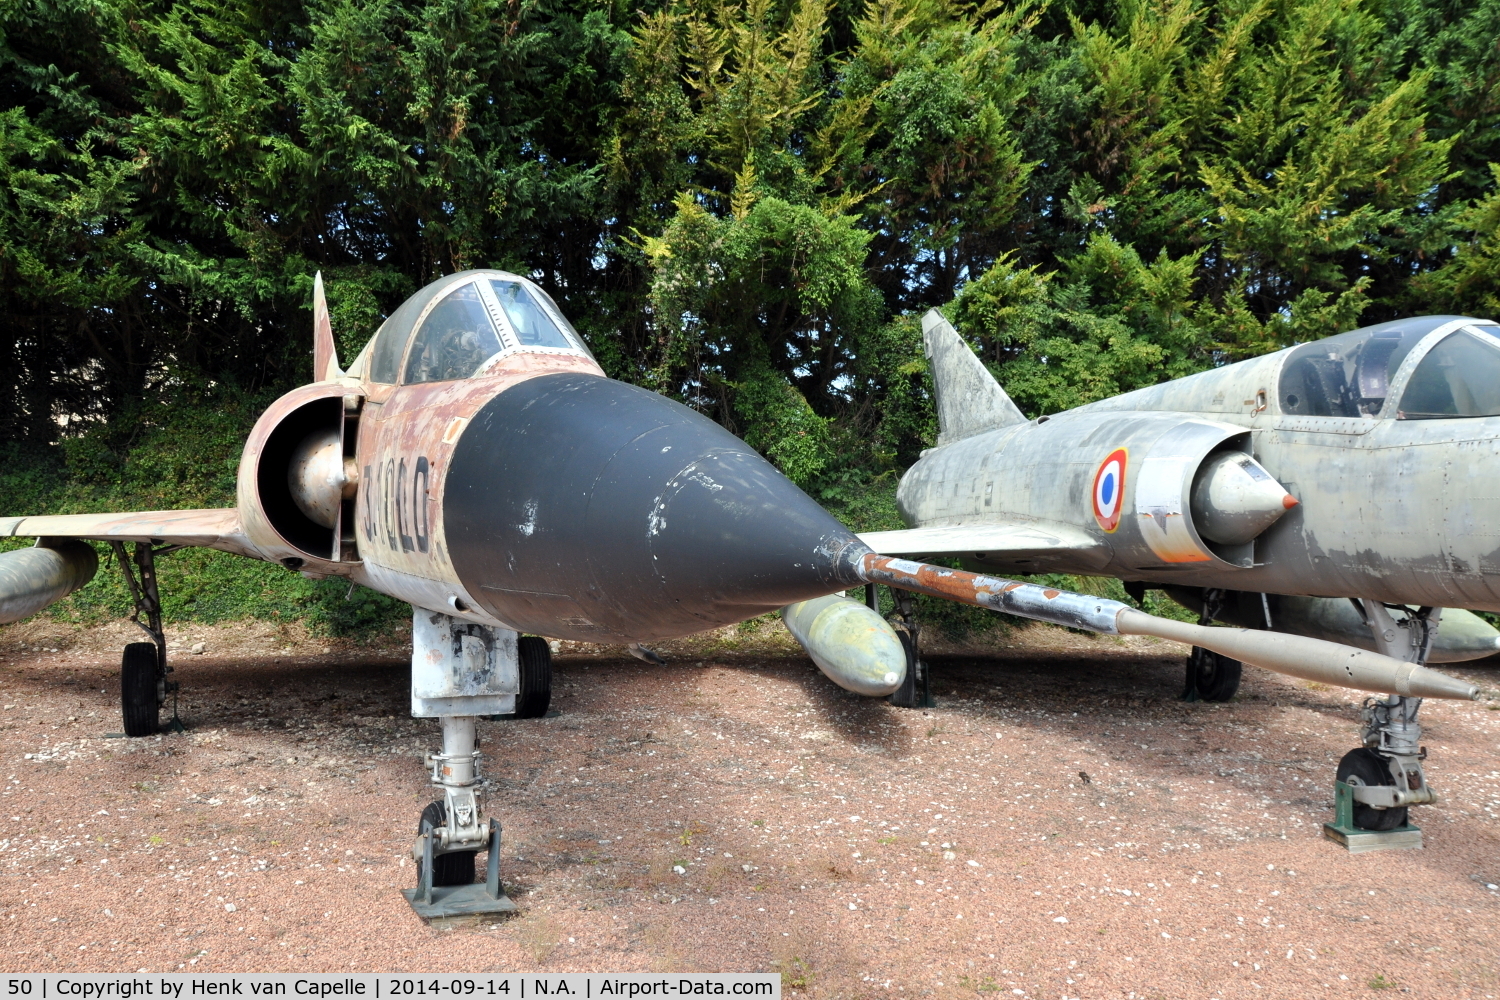 50, Dassault Mirage IIIC C/N 50, Dassault Mirage IIIC of the French Air Force preserved at the Chateau de Savigny aircraft museum.